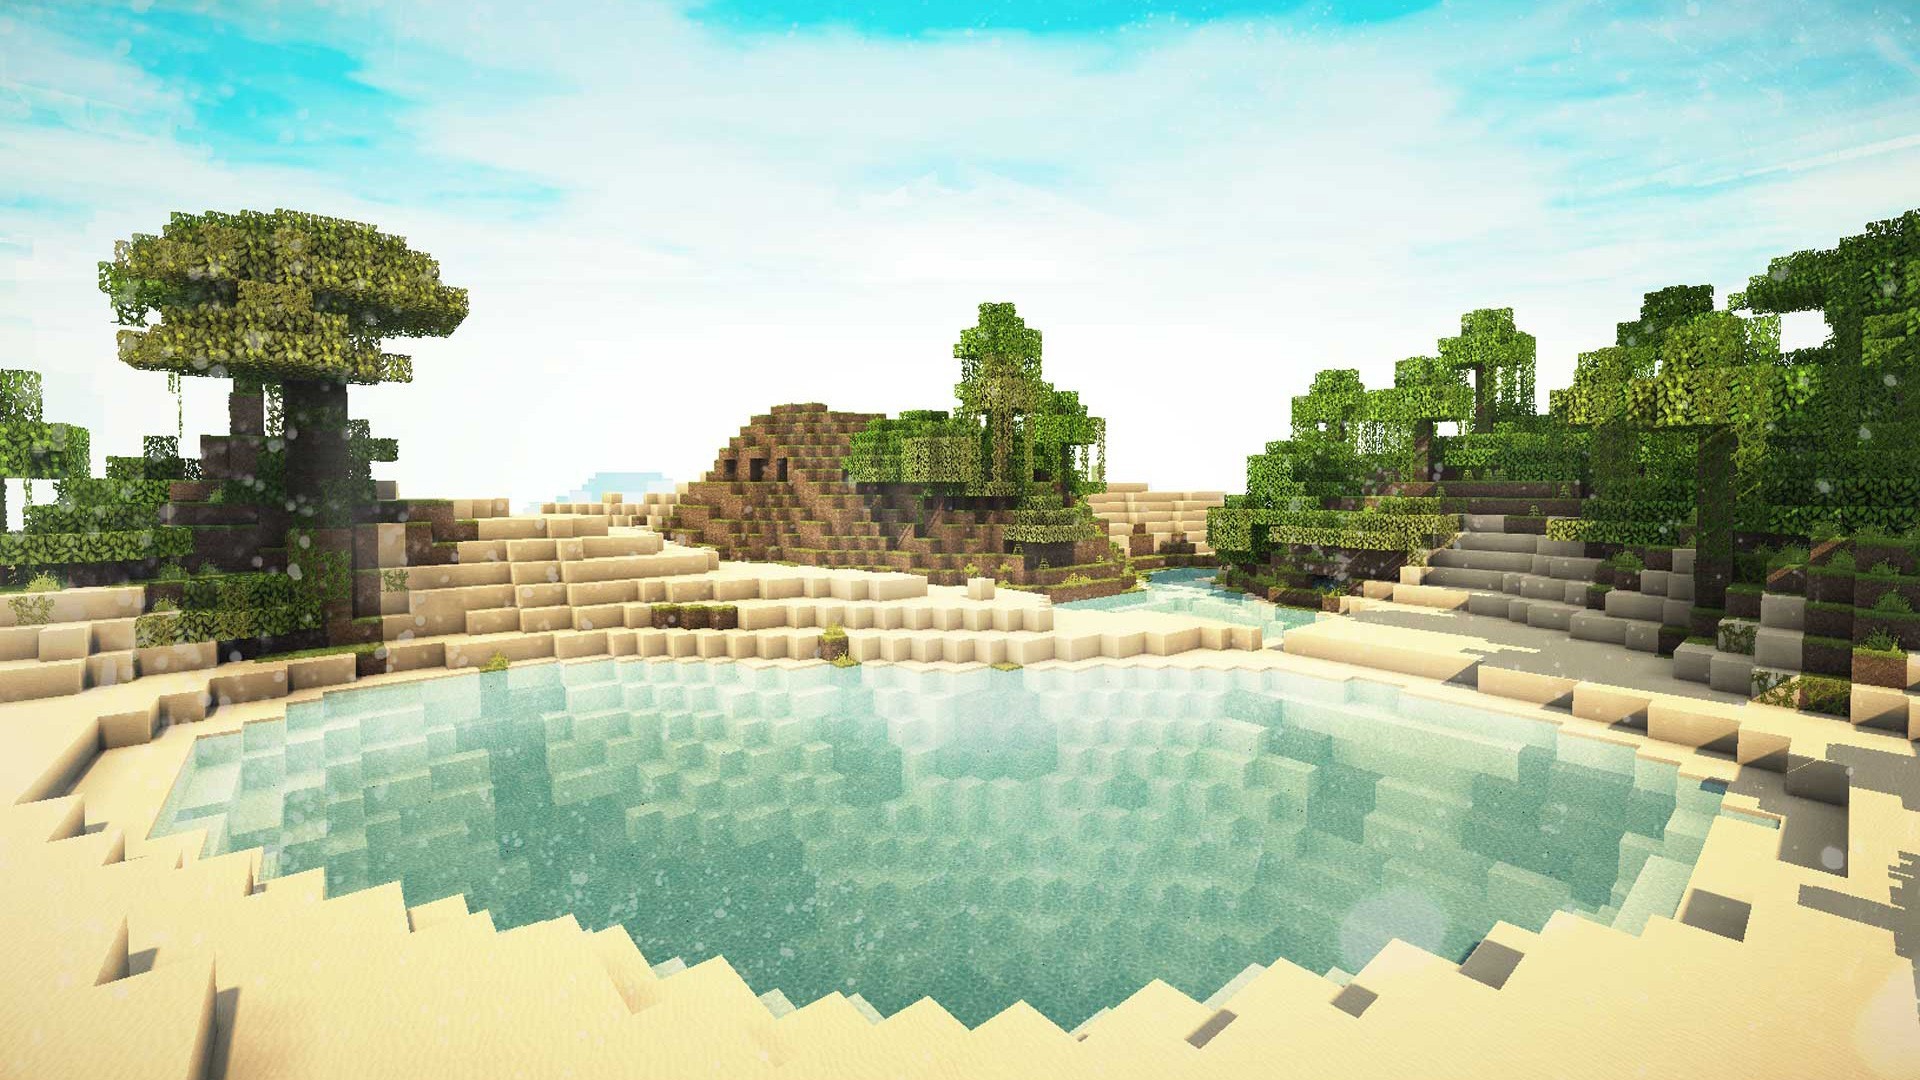 1920x1080 385 Minecraft HD Wallpapers | Backgrounds Wallpaper Gallery